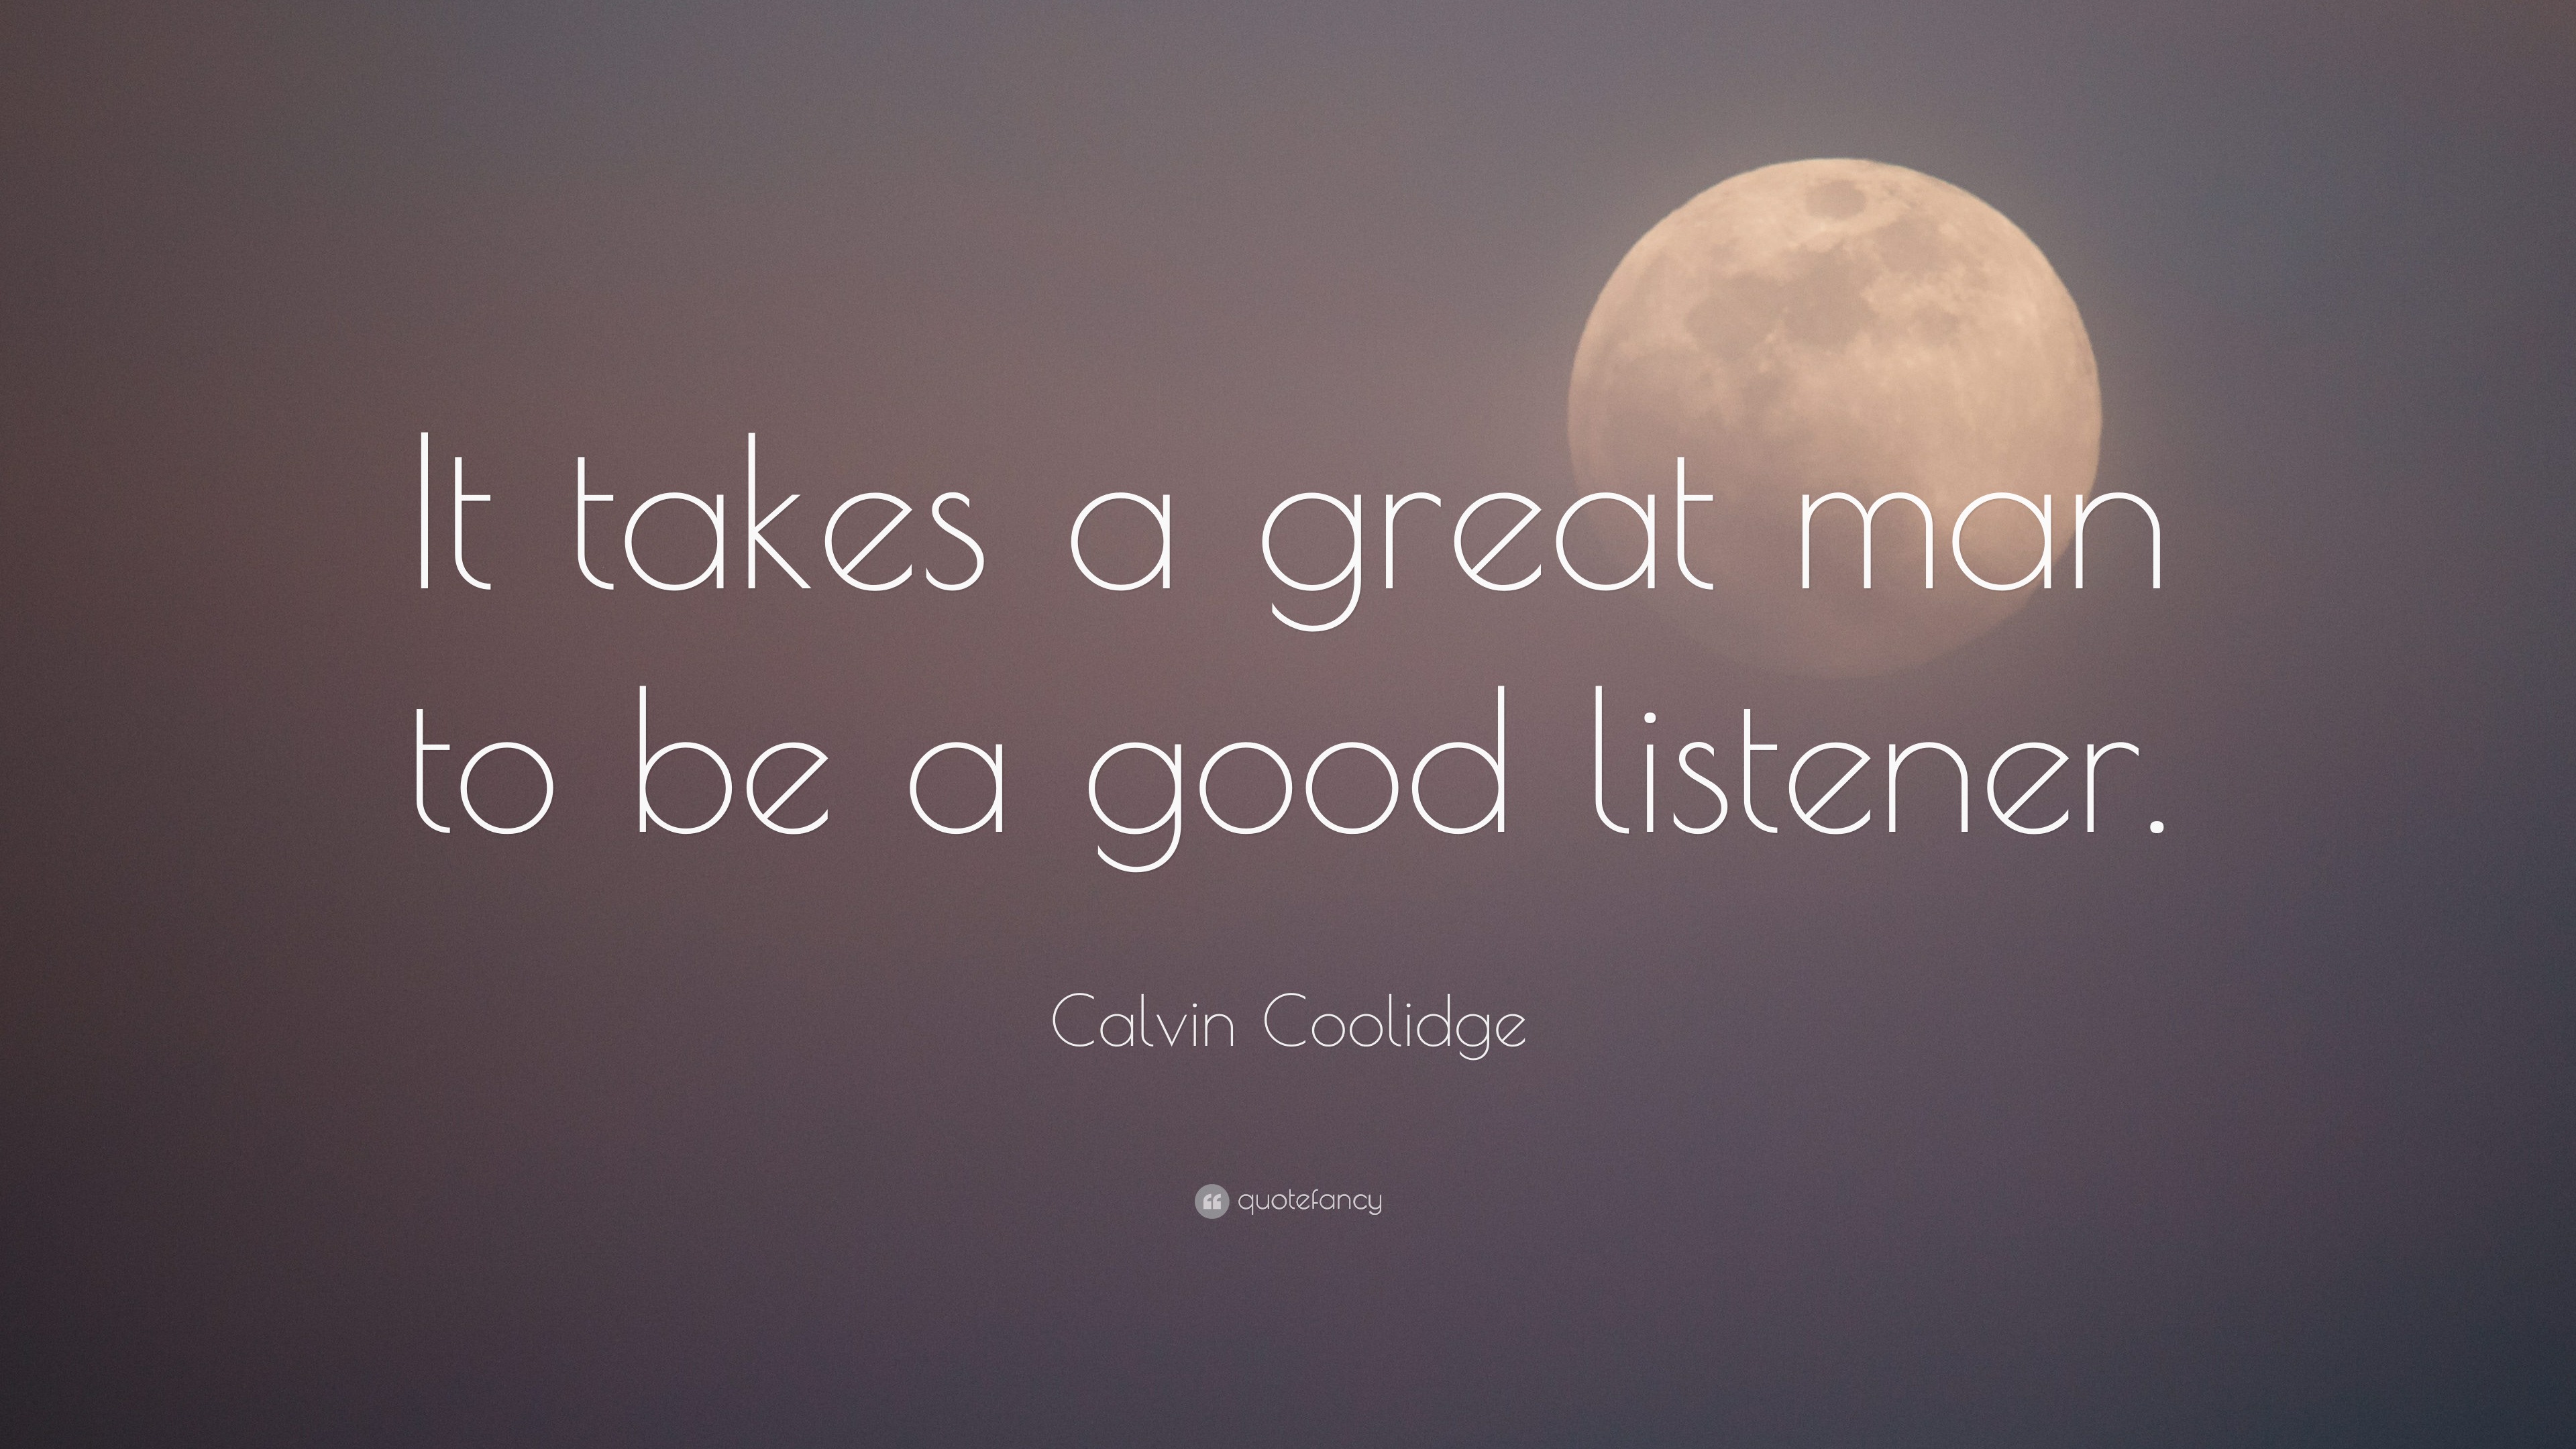 Calvin Coolidge Quote: “It takes a great man to be a good listener